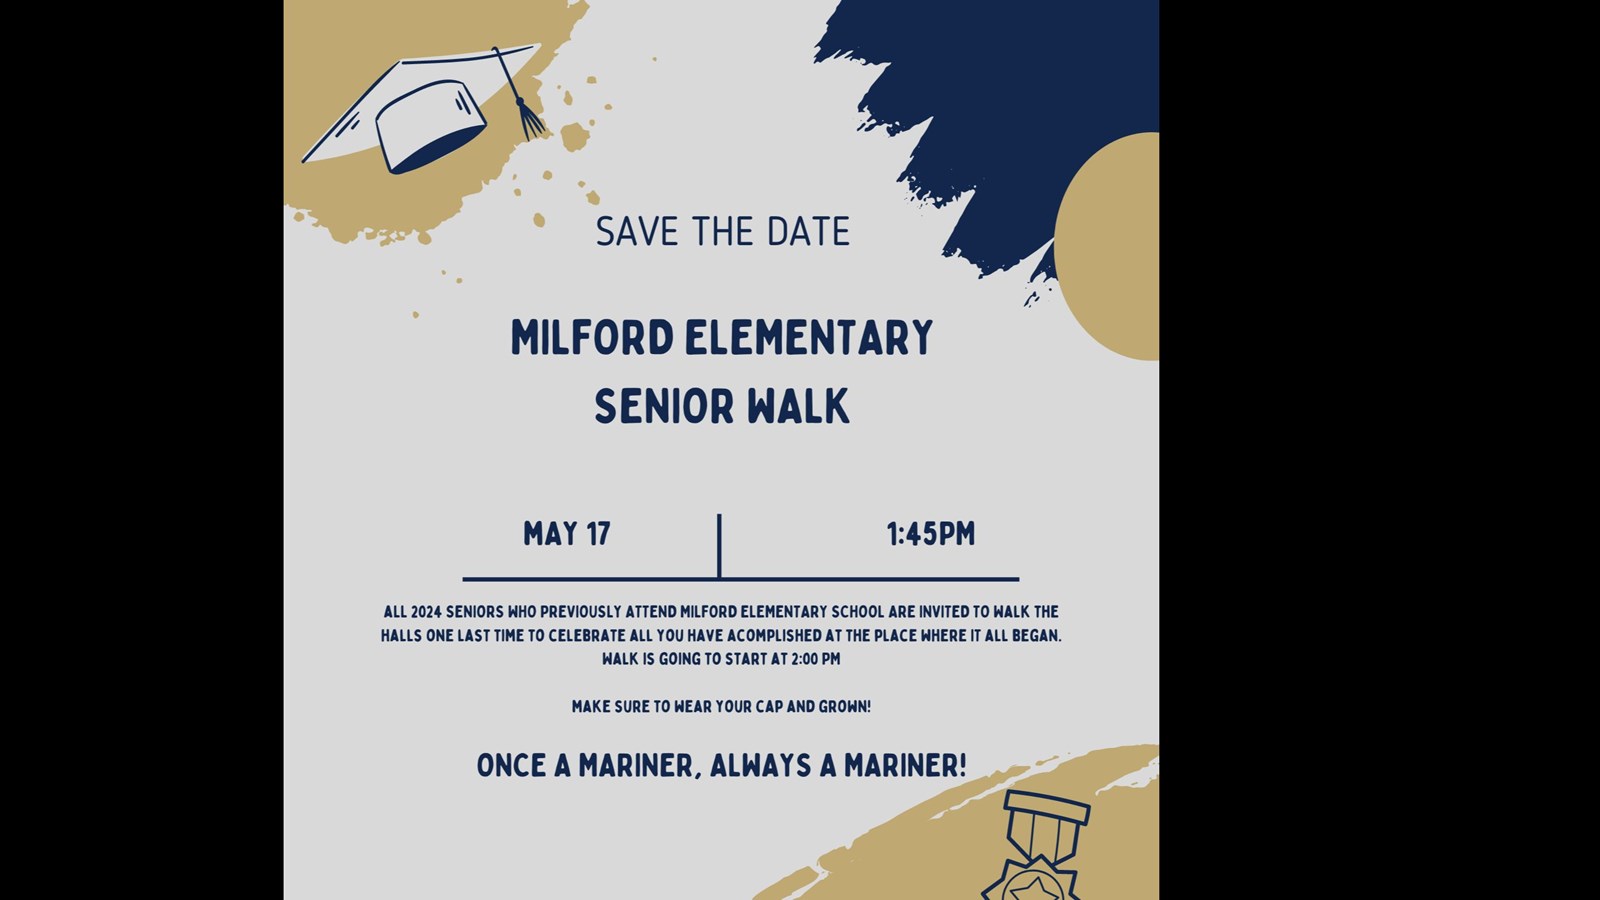 Milford elementary senior walk is may 17 and 1:45